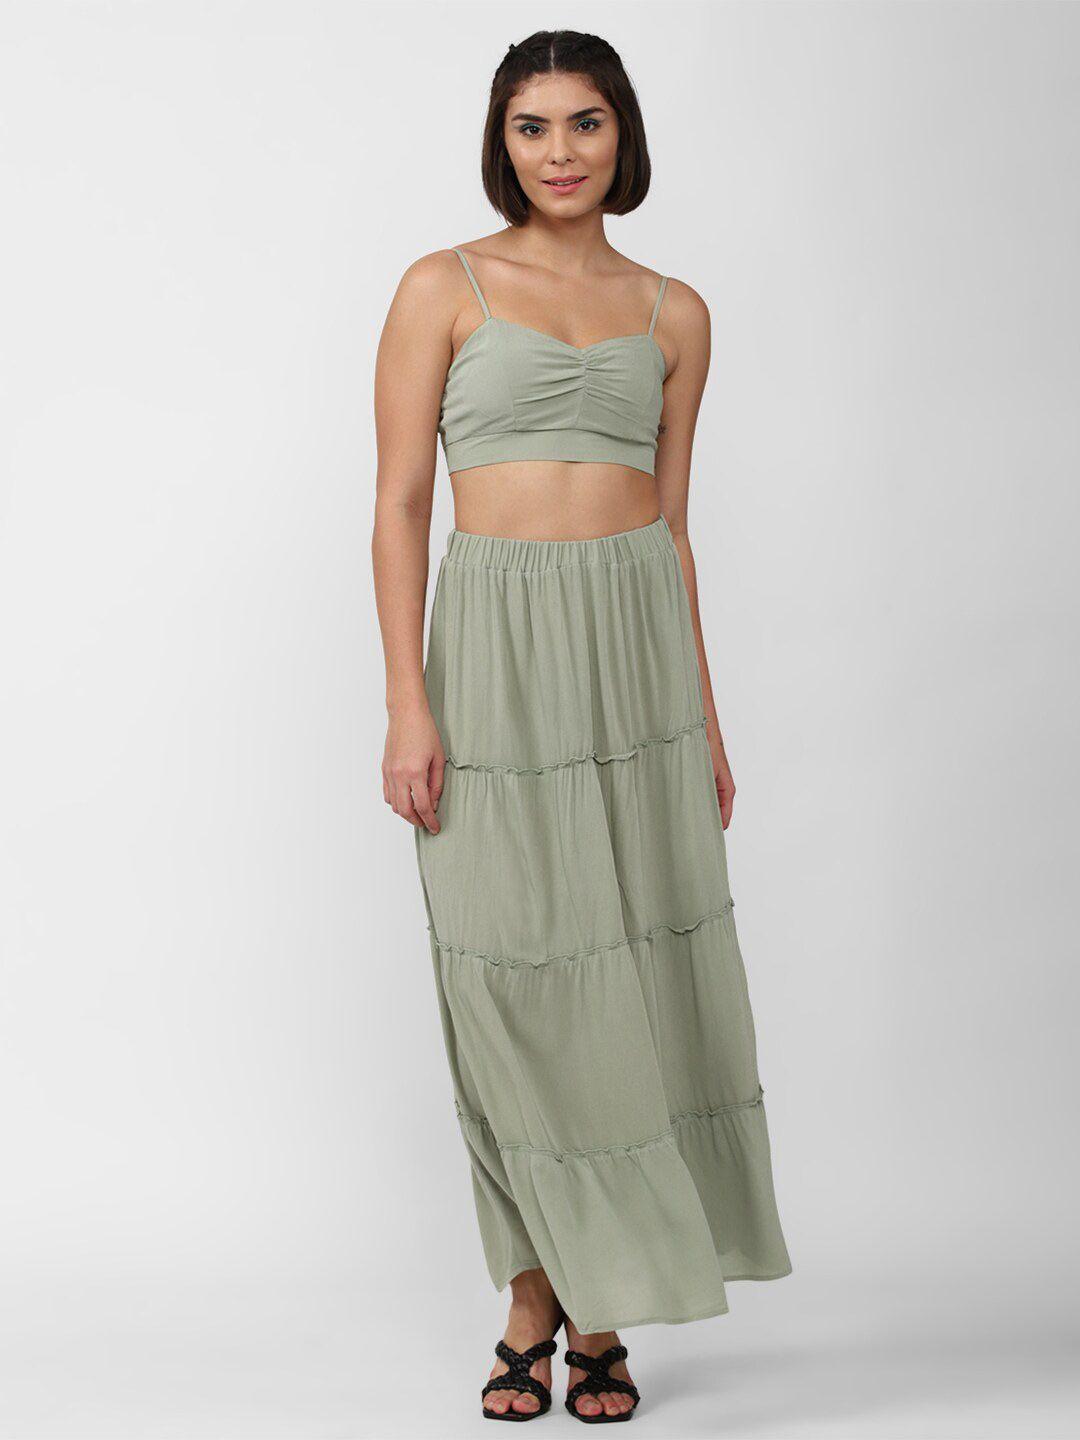 forever 21 women top with skirt co-ords set